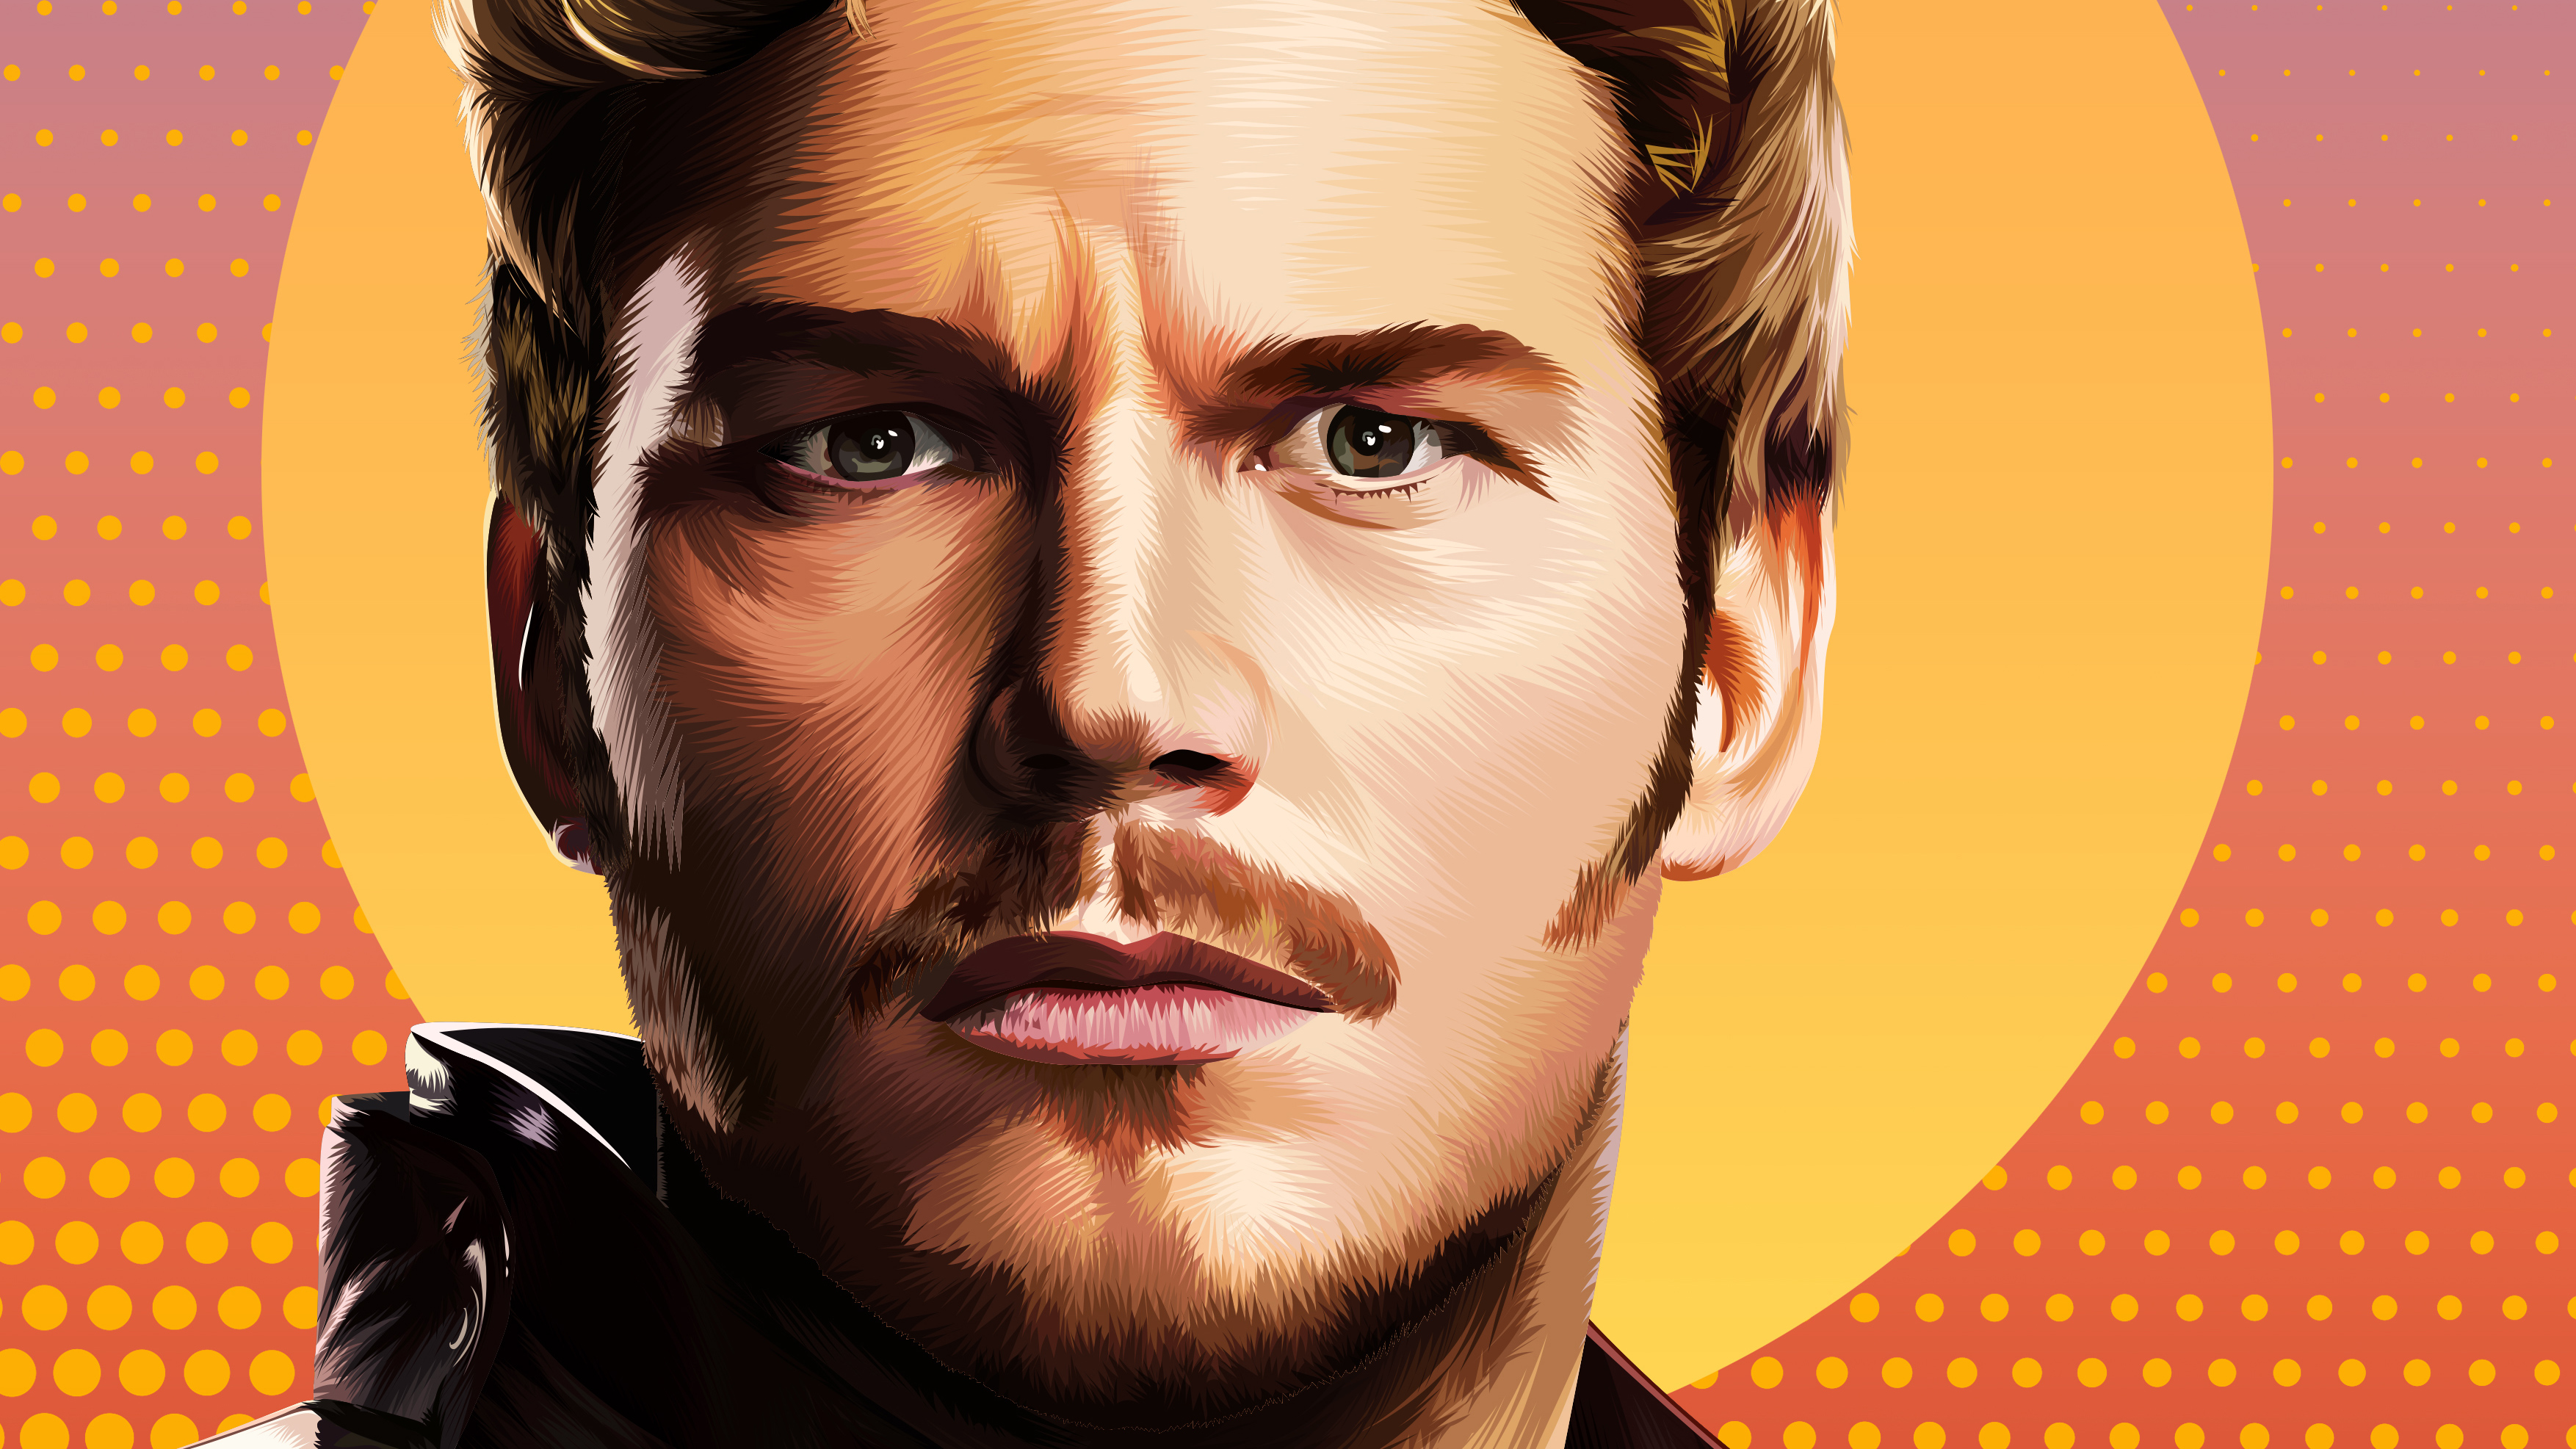 Photo star lord superheroes digital art - free pictures on Fonwall.